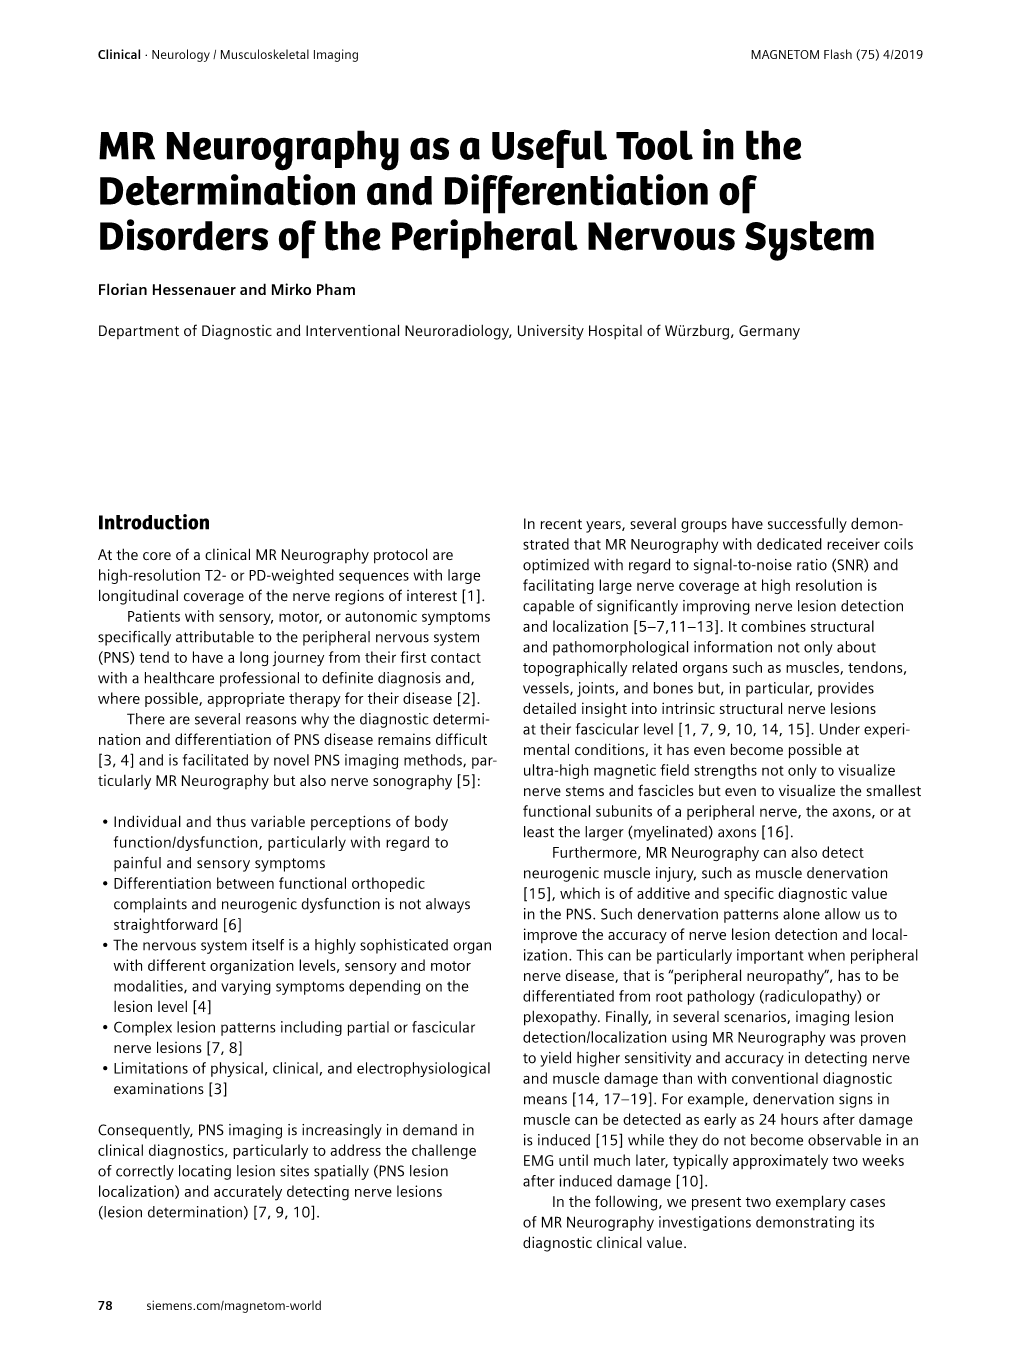 MR Neurography As a Useful Tool in the Determination and Differentiation of Disorders of the Peripheral Nervous System